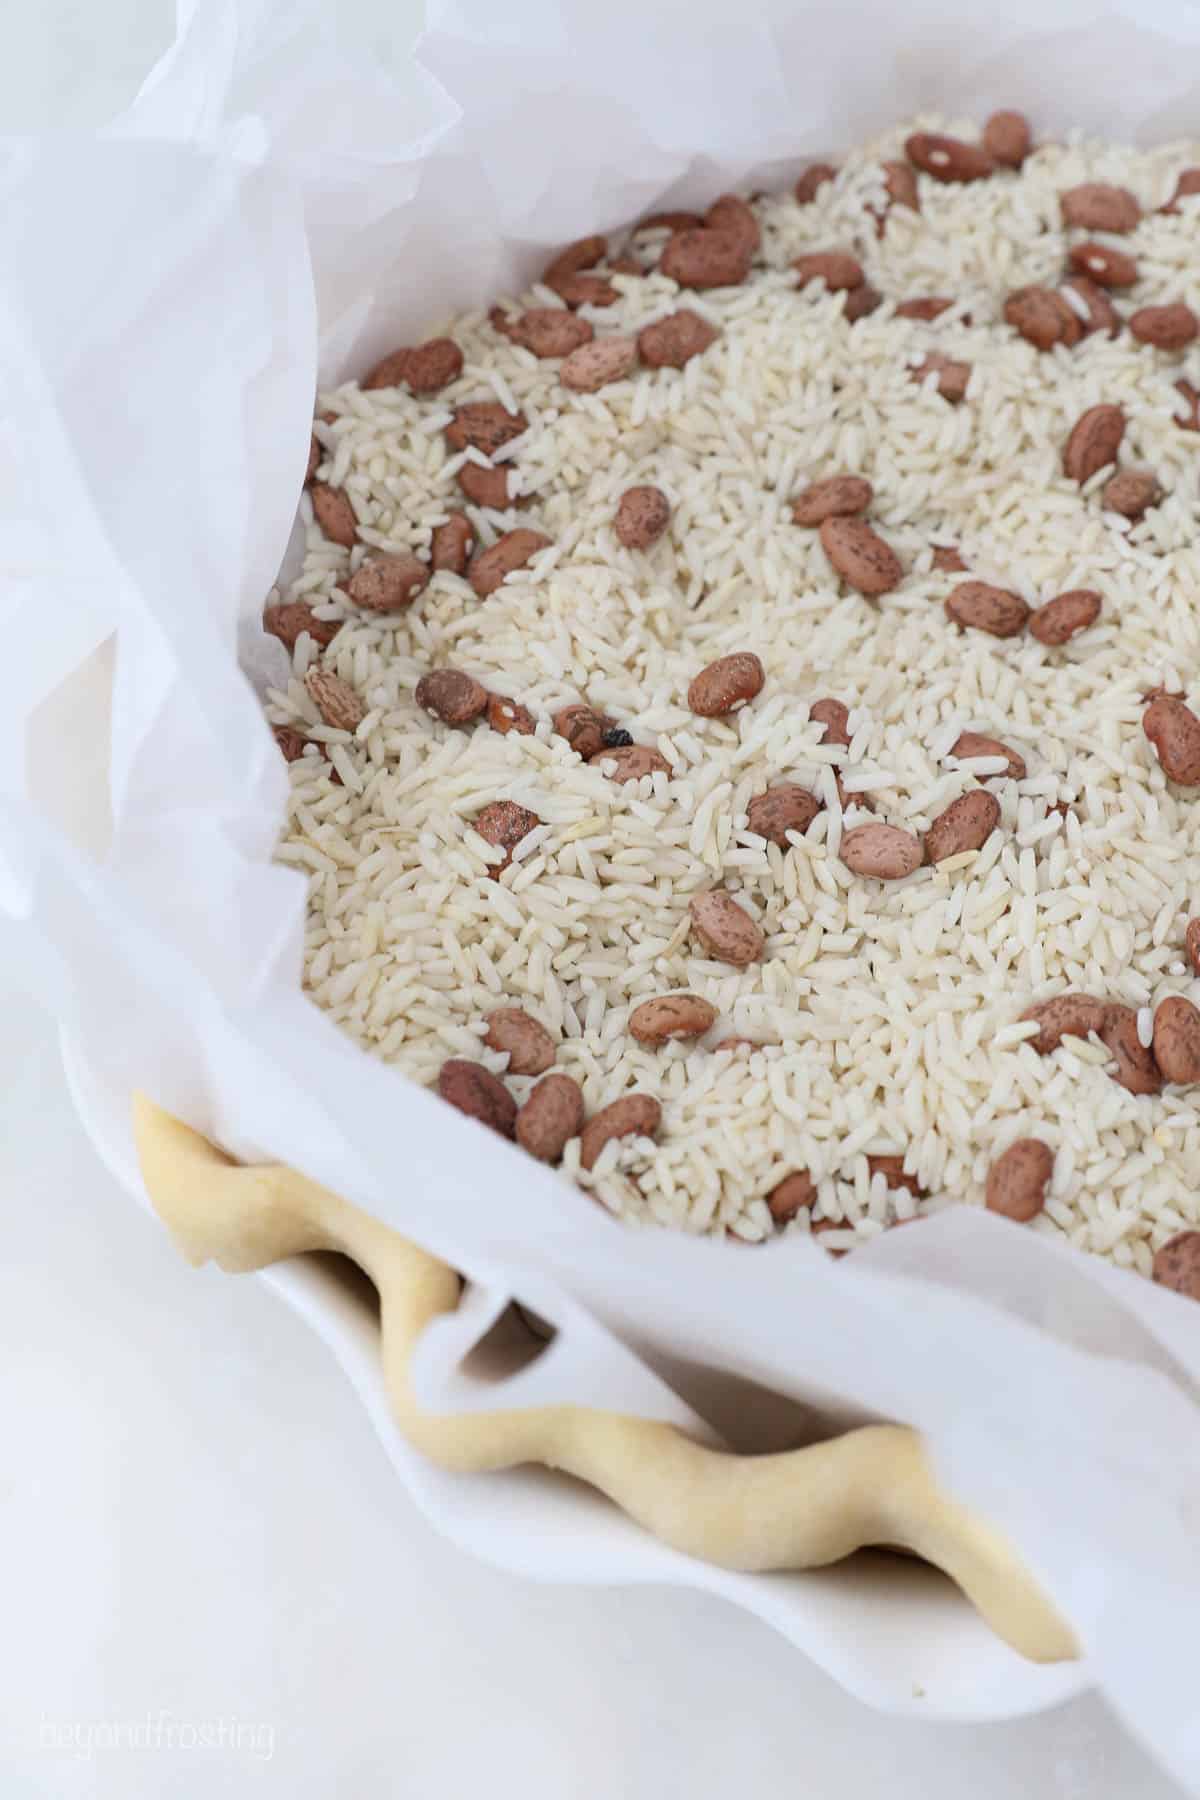 A pie crust lined with two sheets of parchment paper and filled with dry rice and beans